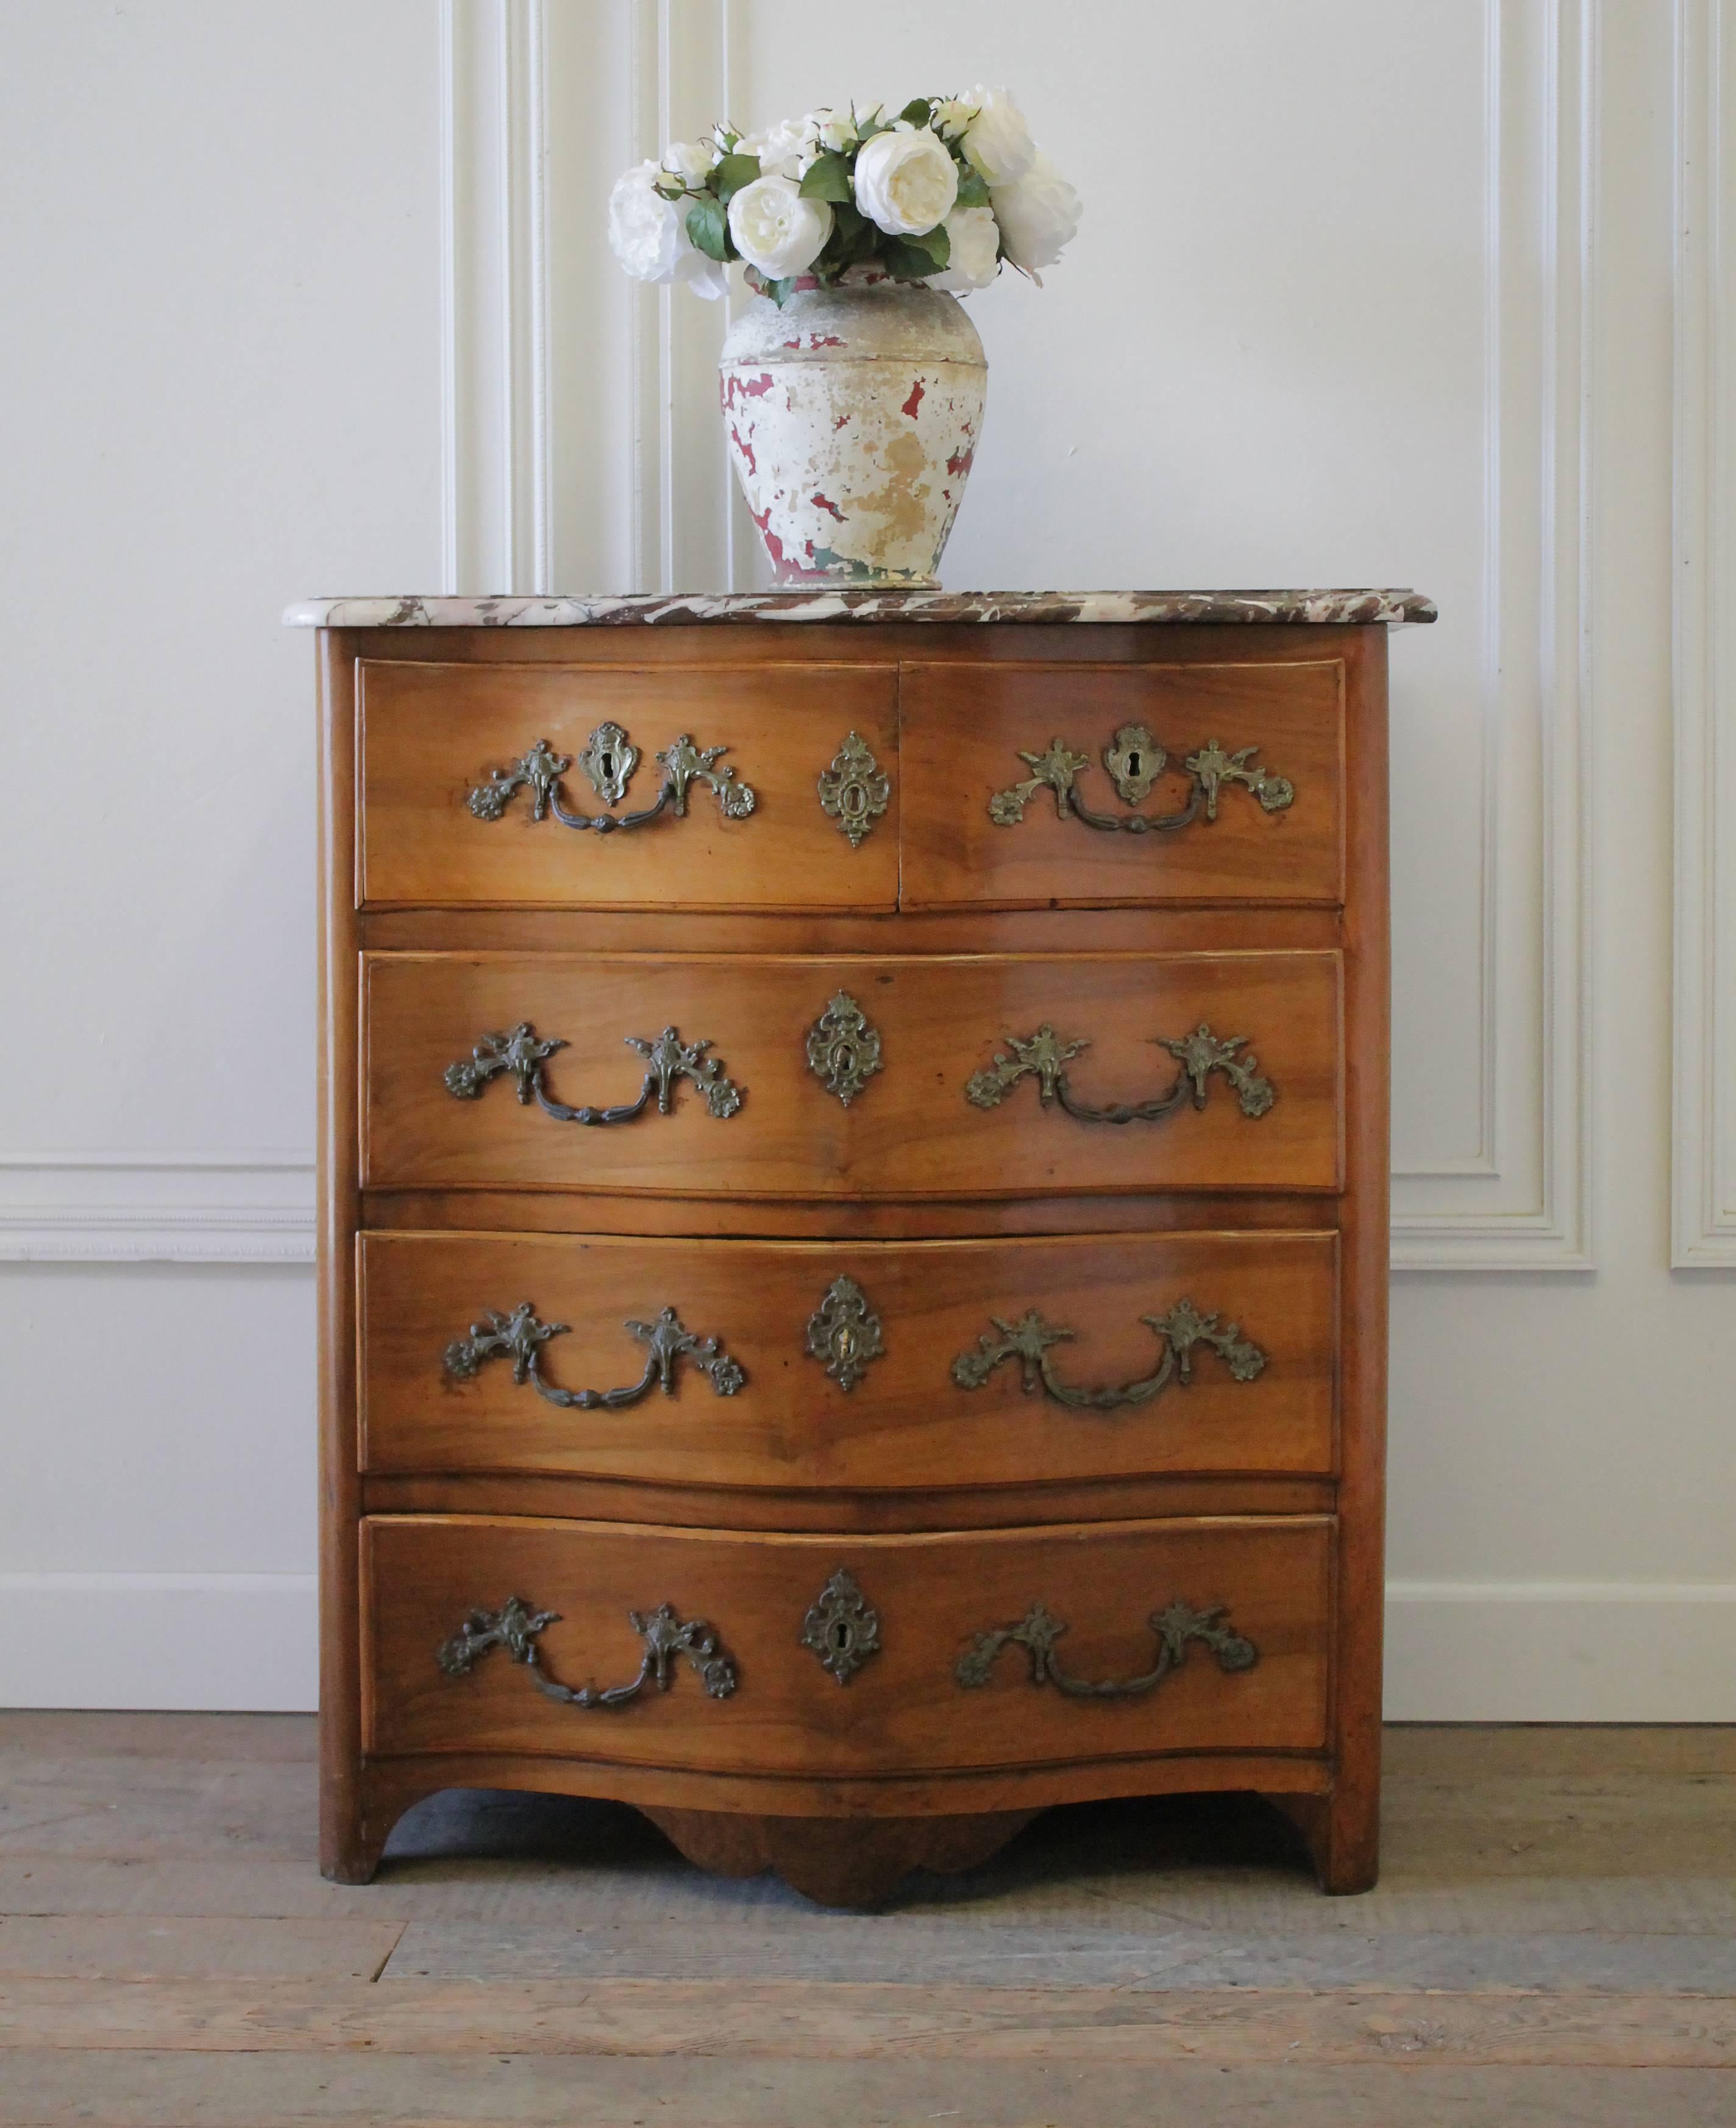 19th century French walnut chest of drawers with marble top has five working drawers. Beautiful bronze hardware and decorative escutcheons with aged patina. There are two working keys for this chest, the one key locks the top drawers and second